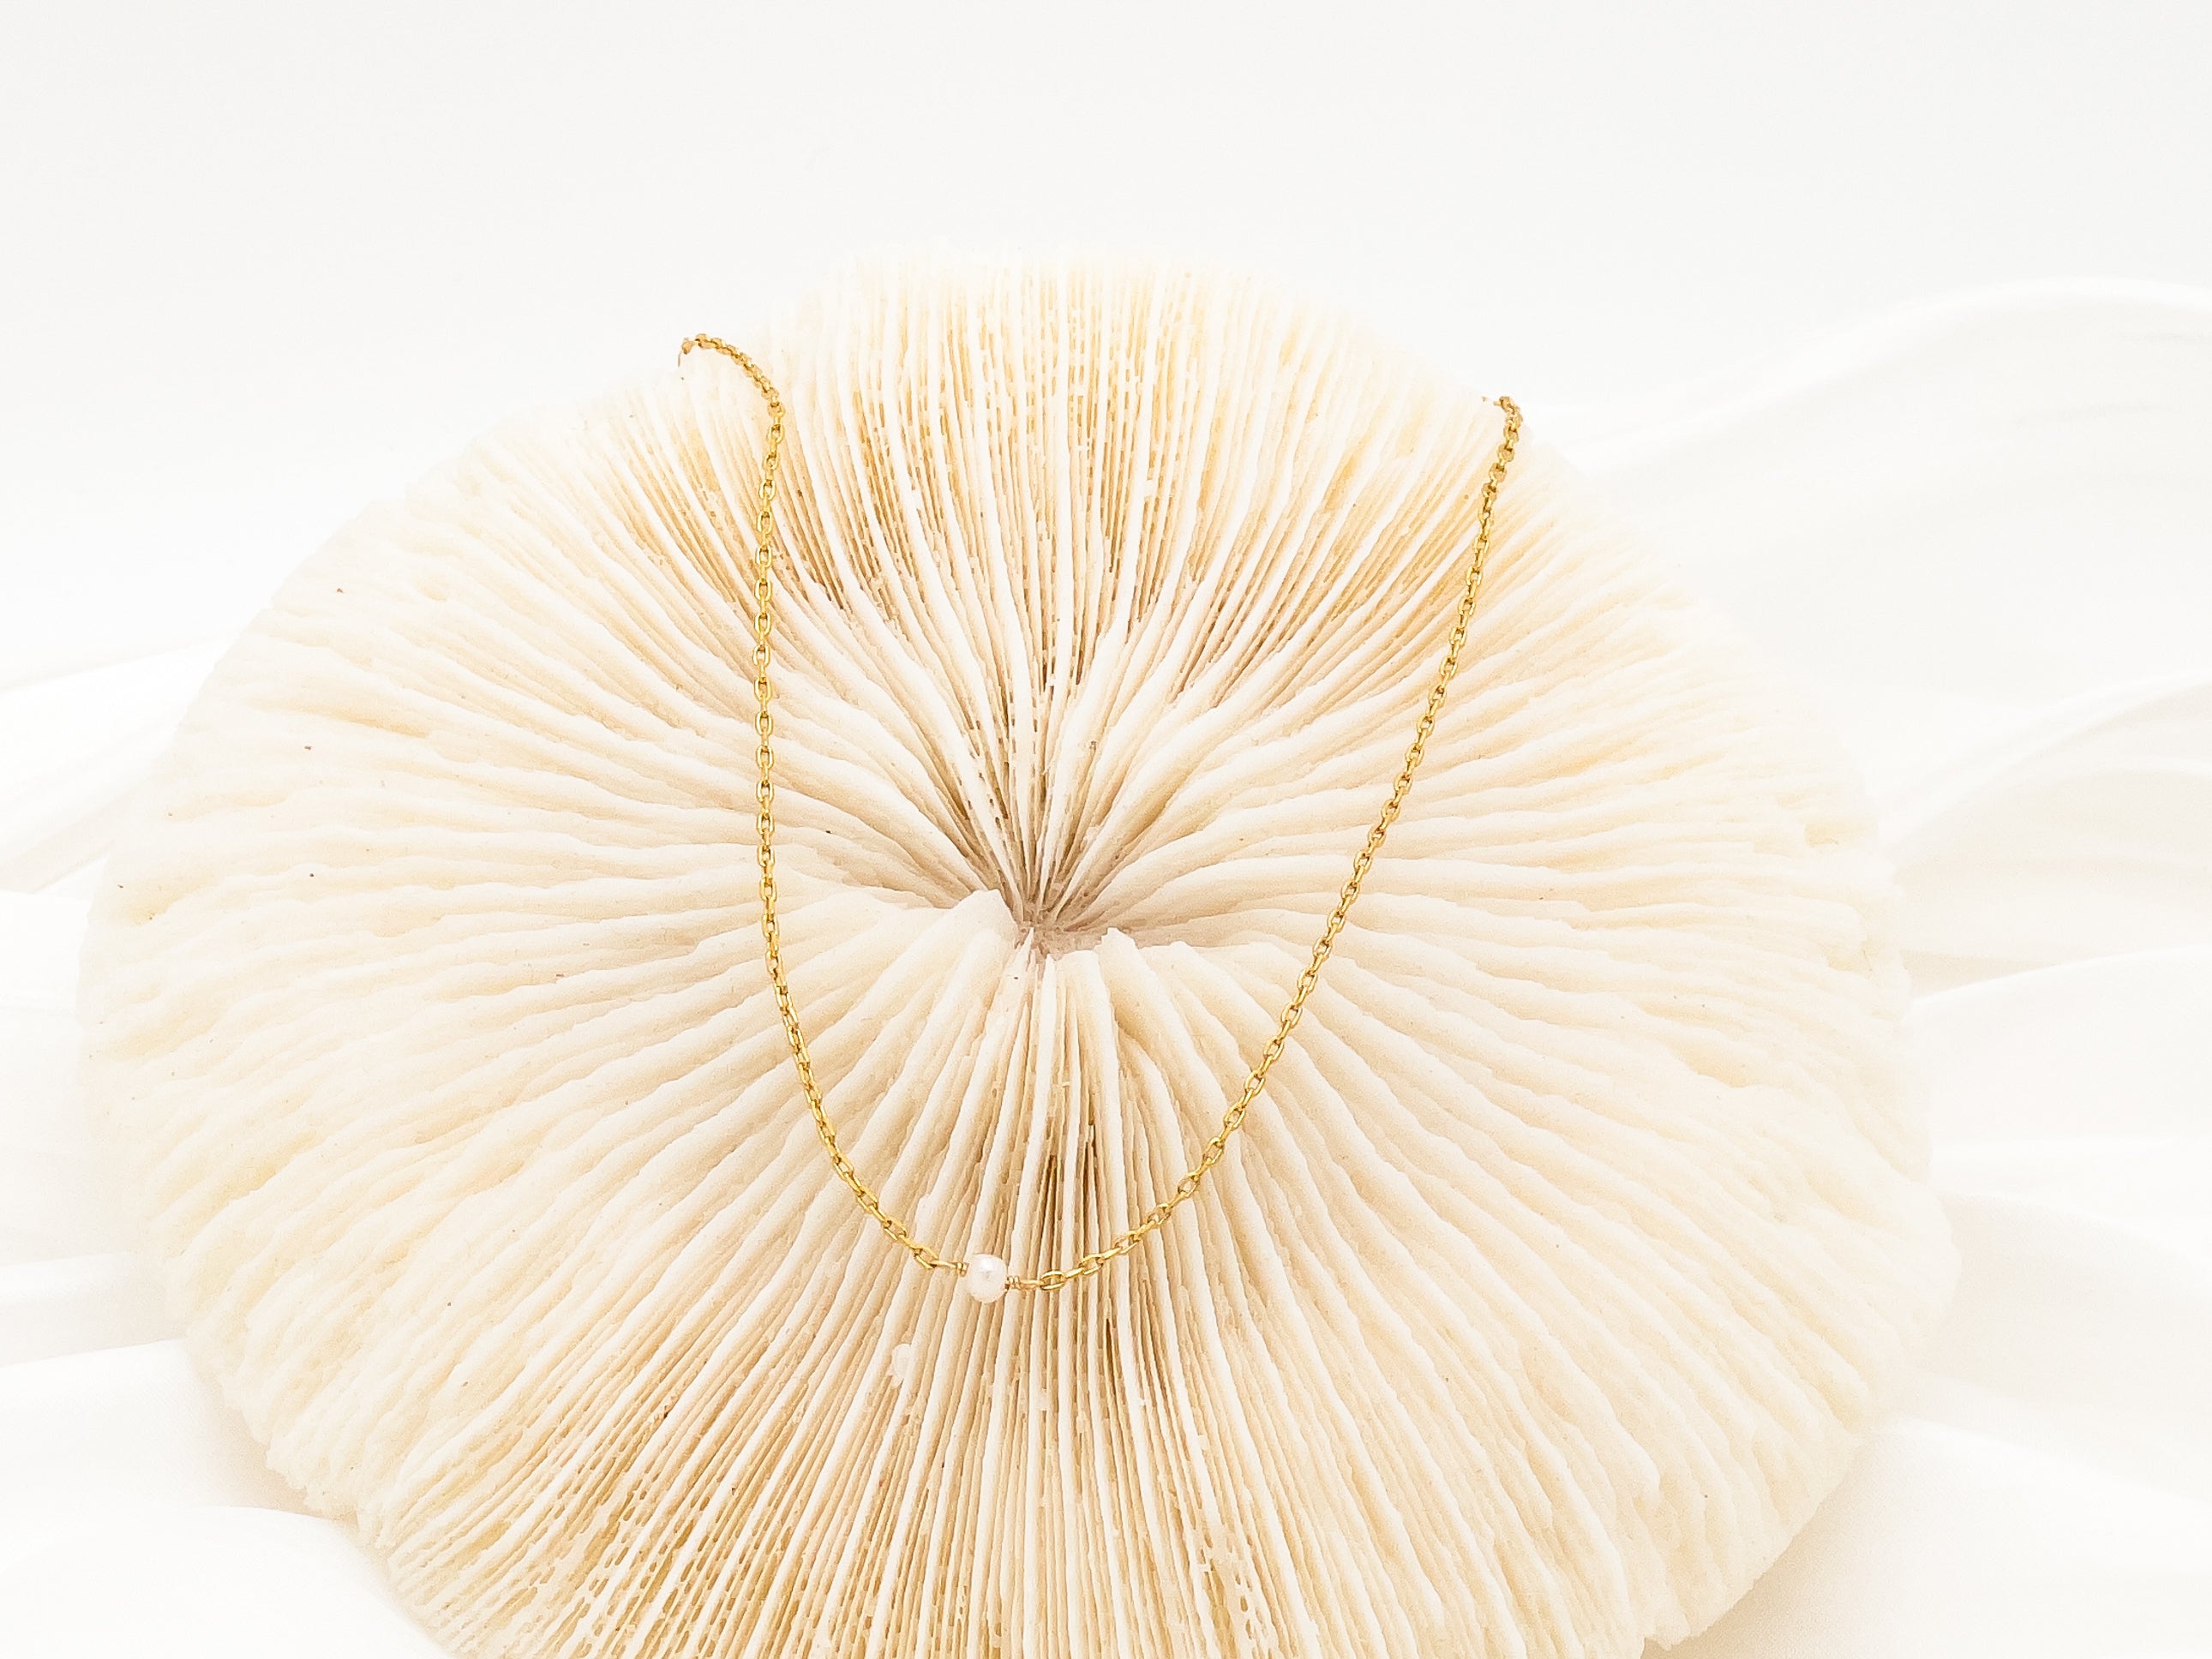 Pearl Venus Layered Chain Necklace - Everyday Jewelry | Chic Chic Bon